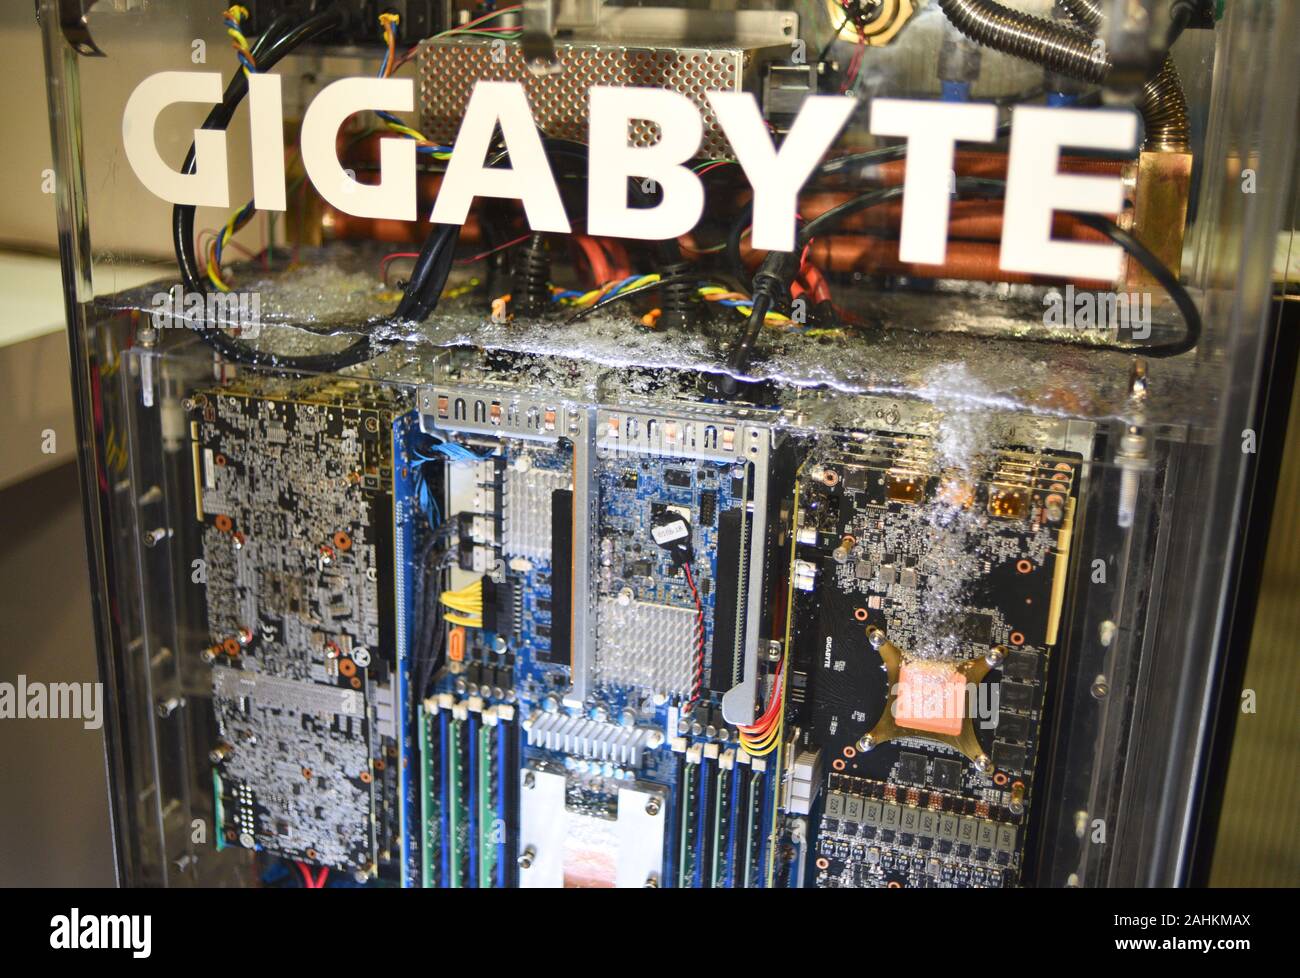 Gigabyte two-phase immersion liquid (3M Novec fluid) cooling completely submerged data center/server type computer at CES, Las Vegas, NV, USA. Stock Photo